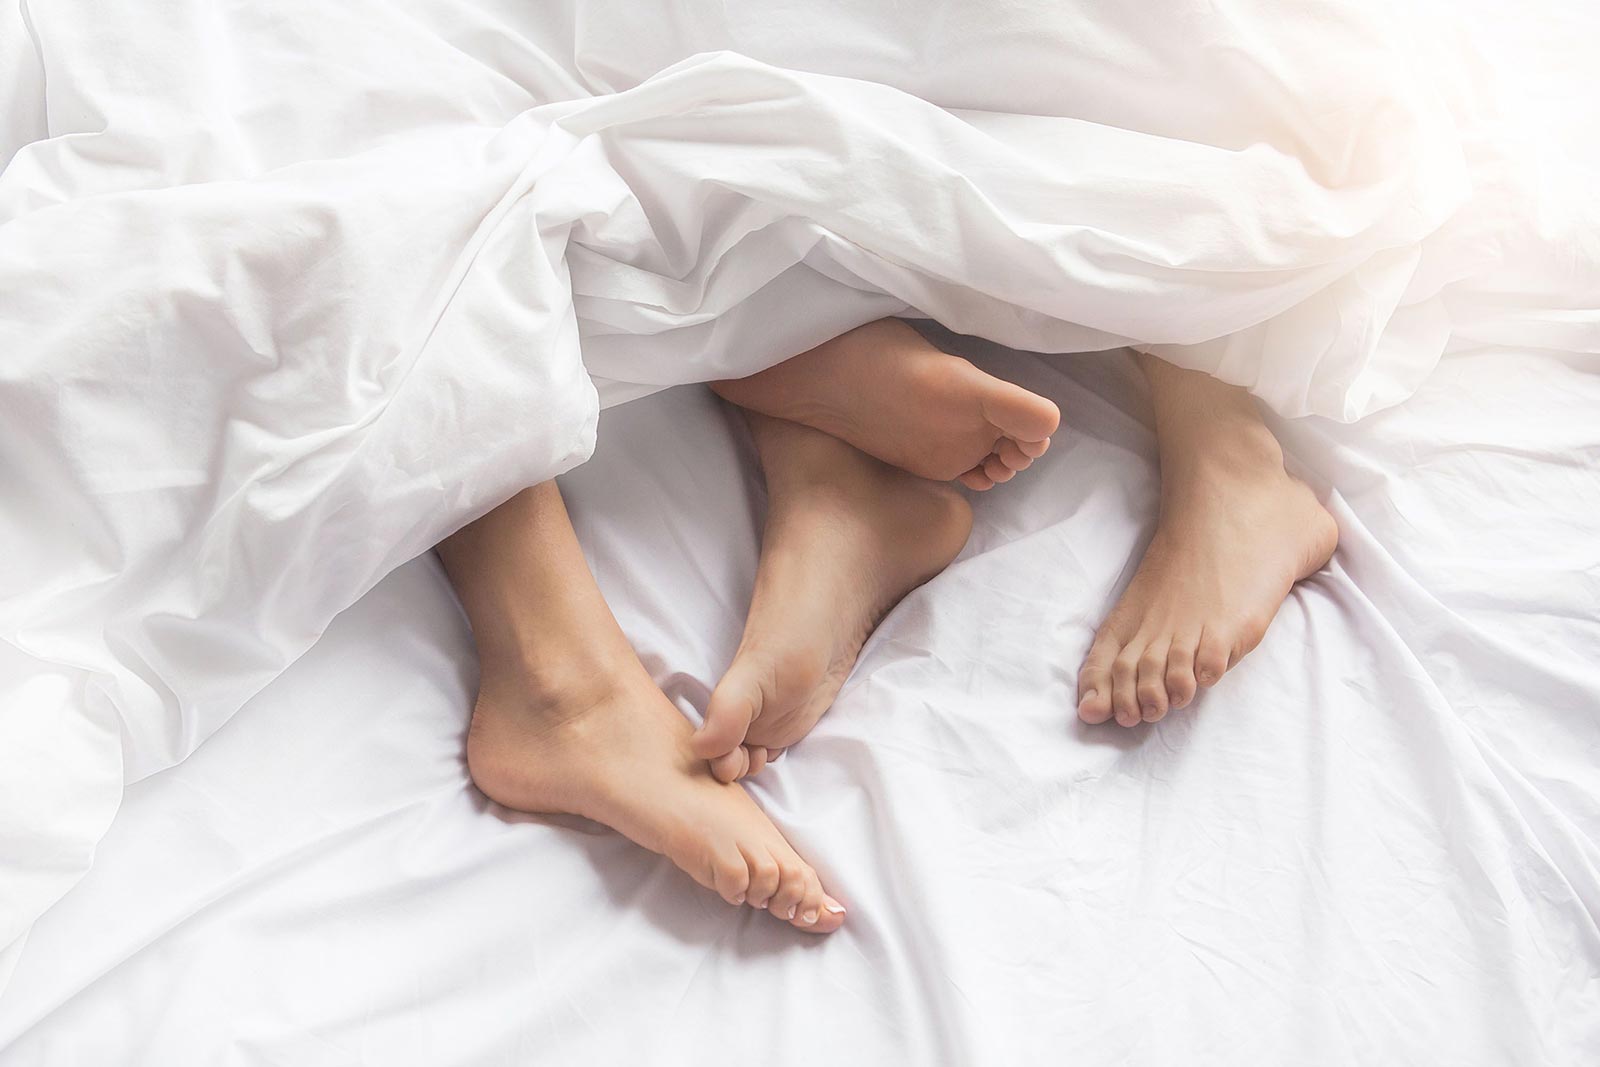 A couples feet entangled in sheets